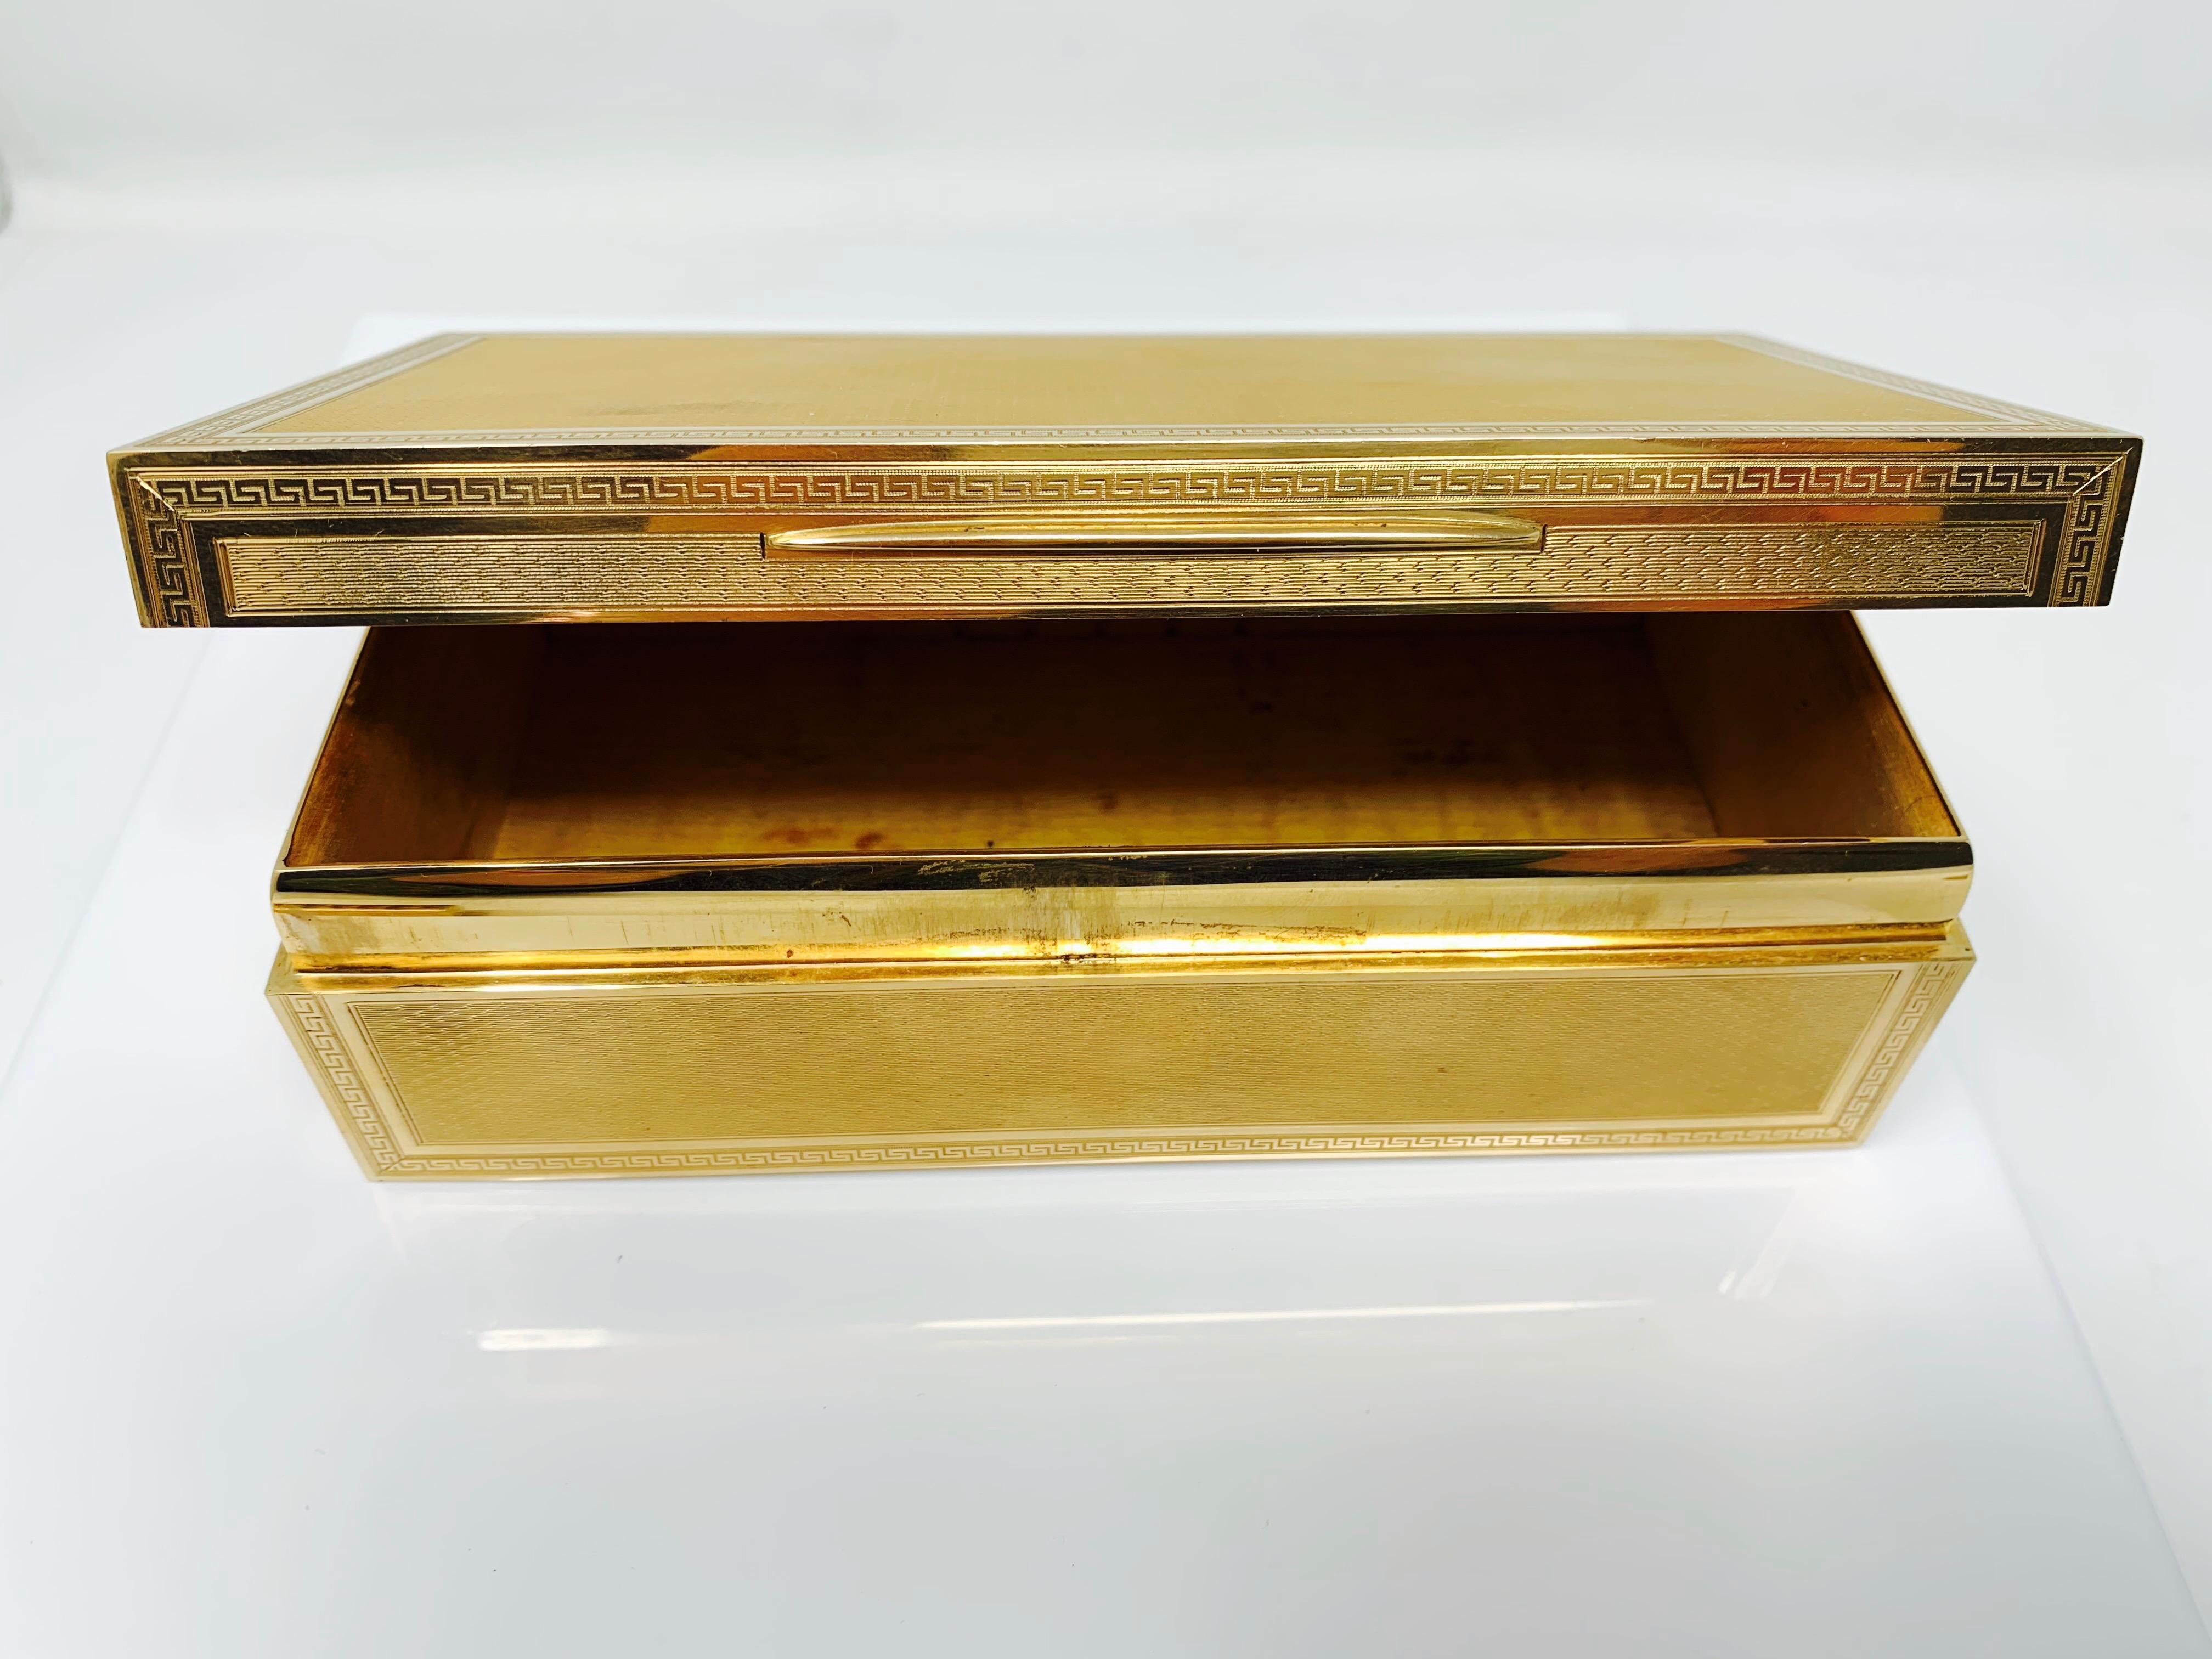 This is a beautiful Tiffany and co gold jewelry box made in 15 carat yellow gold. This jewelry box is gorgeous and unique. 
Measurements: length : 6.5 inch 
width : 3.5 inch 
depth : 2 inch
Gold weight : 750 grams 